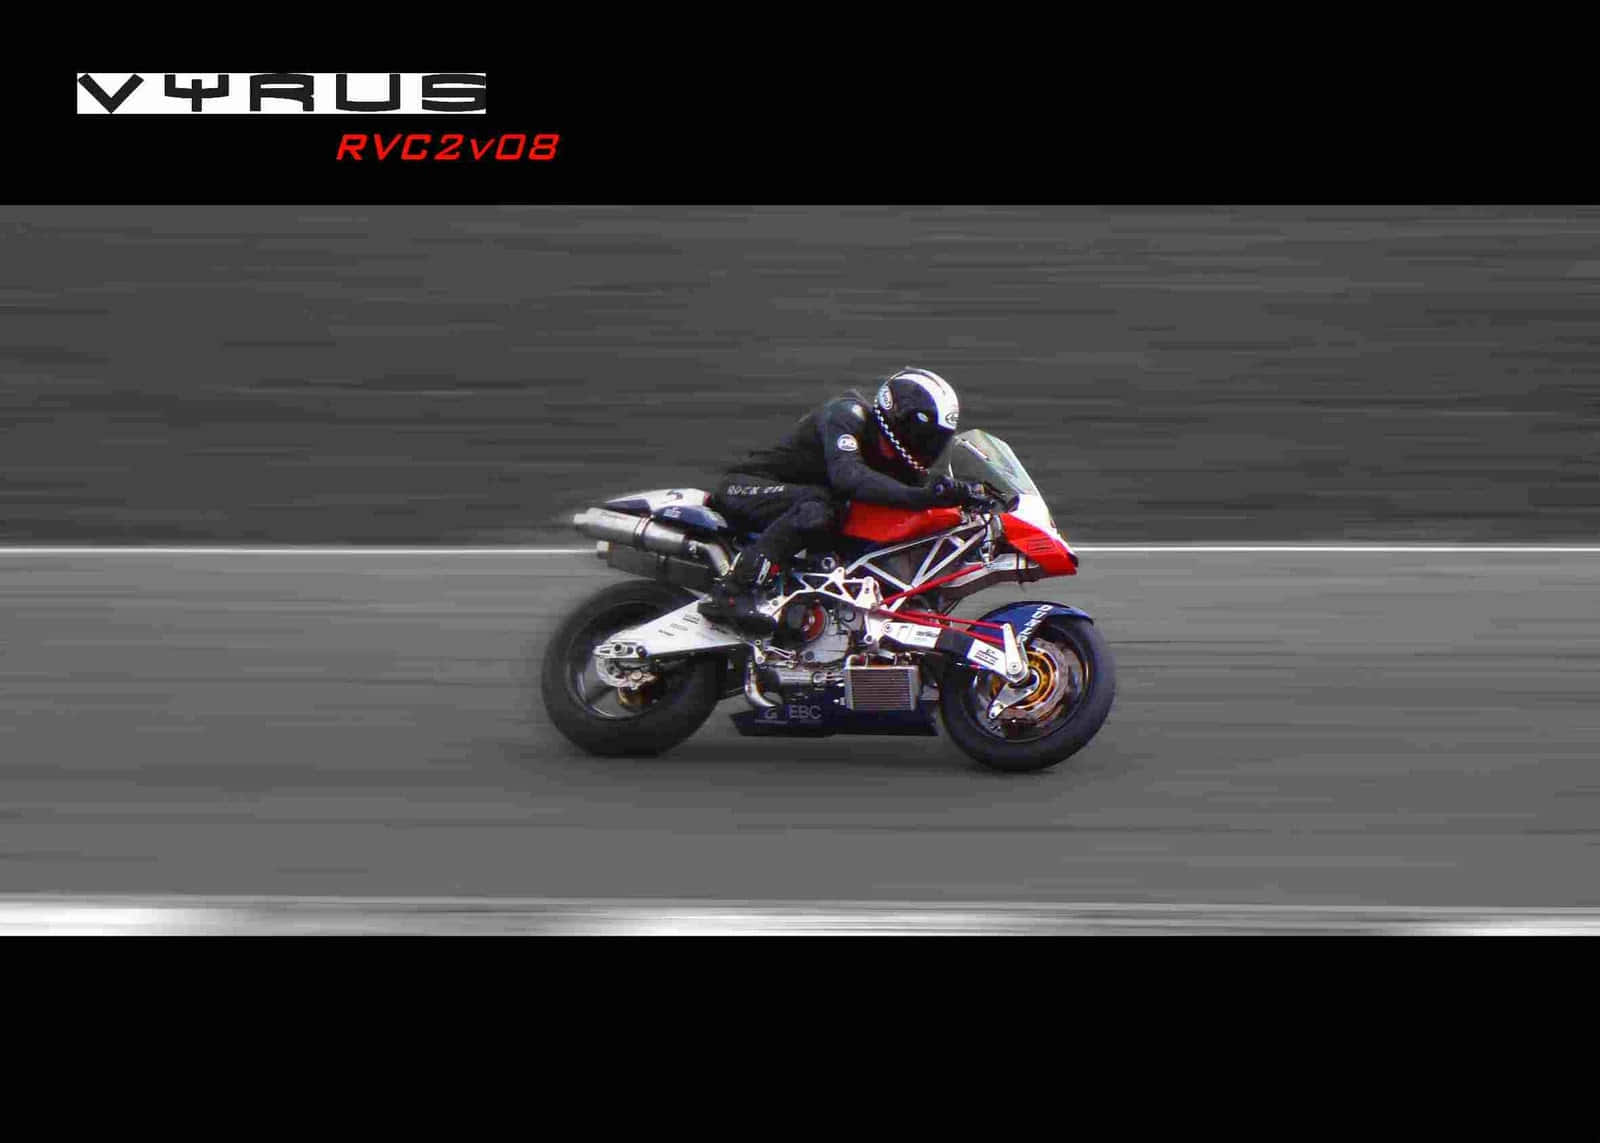 Unleashing Power: The Vyrus Motorcycle In Action Wallpaper